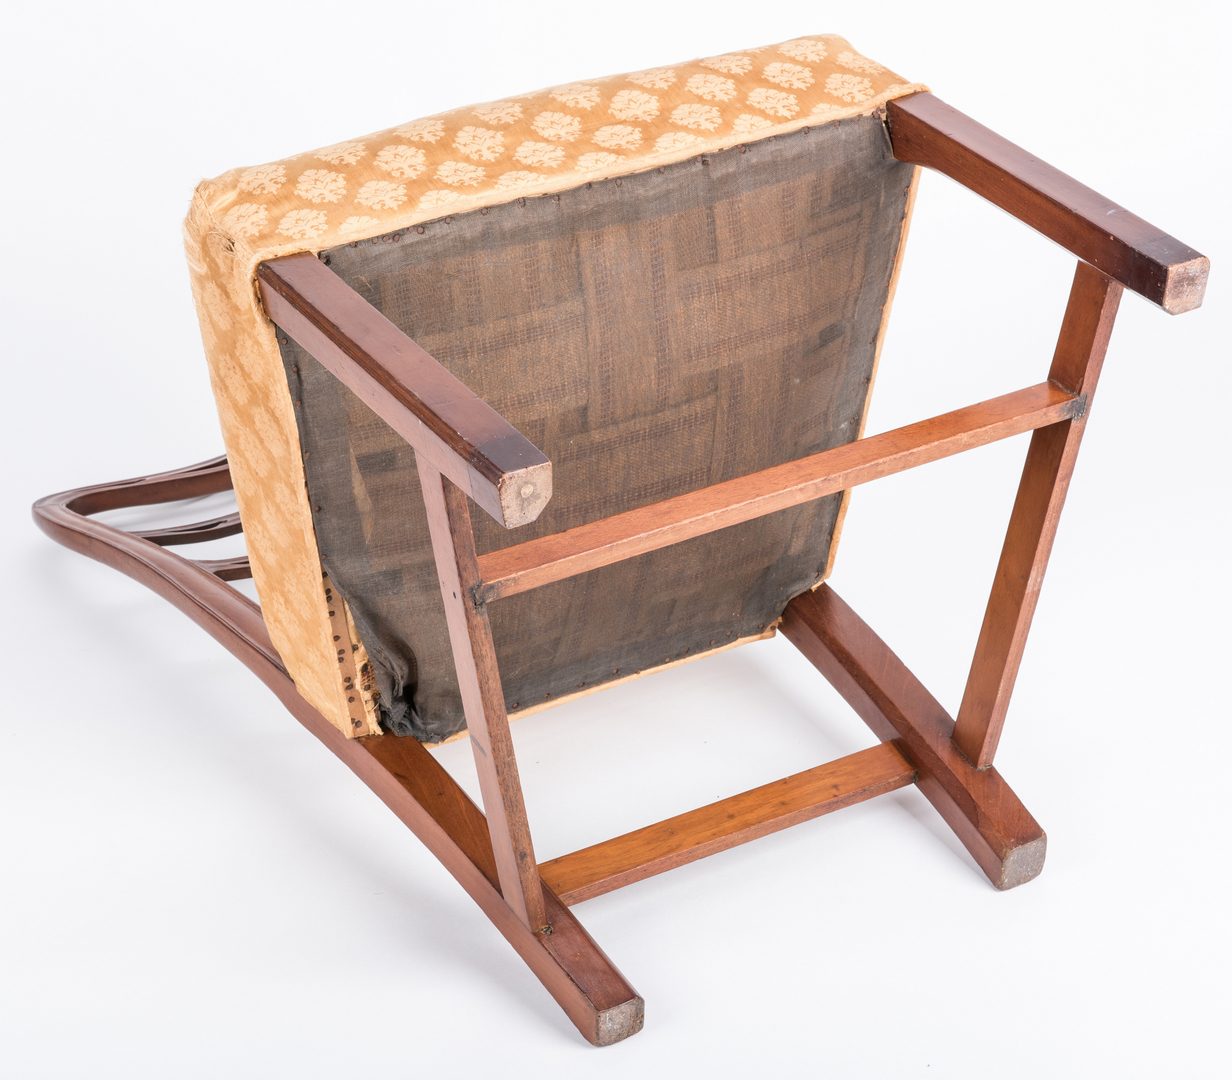 Lot 143: Chair with Mount Vernon History